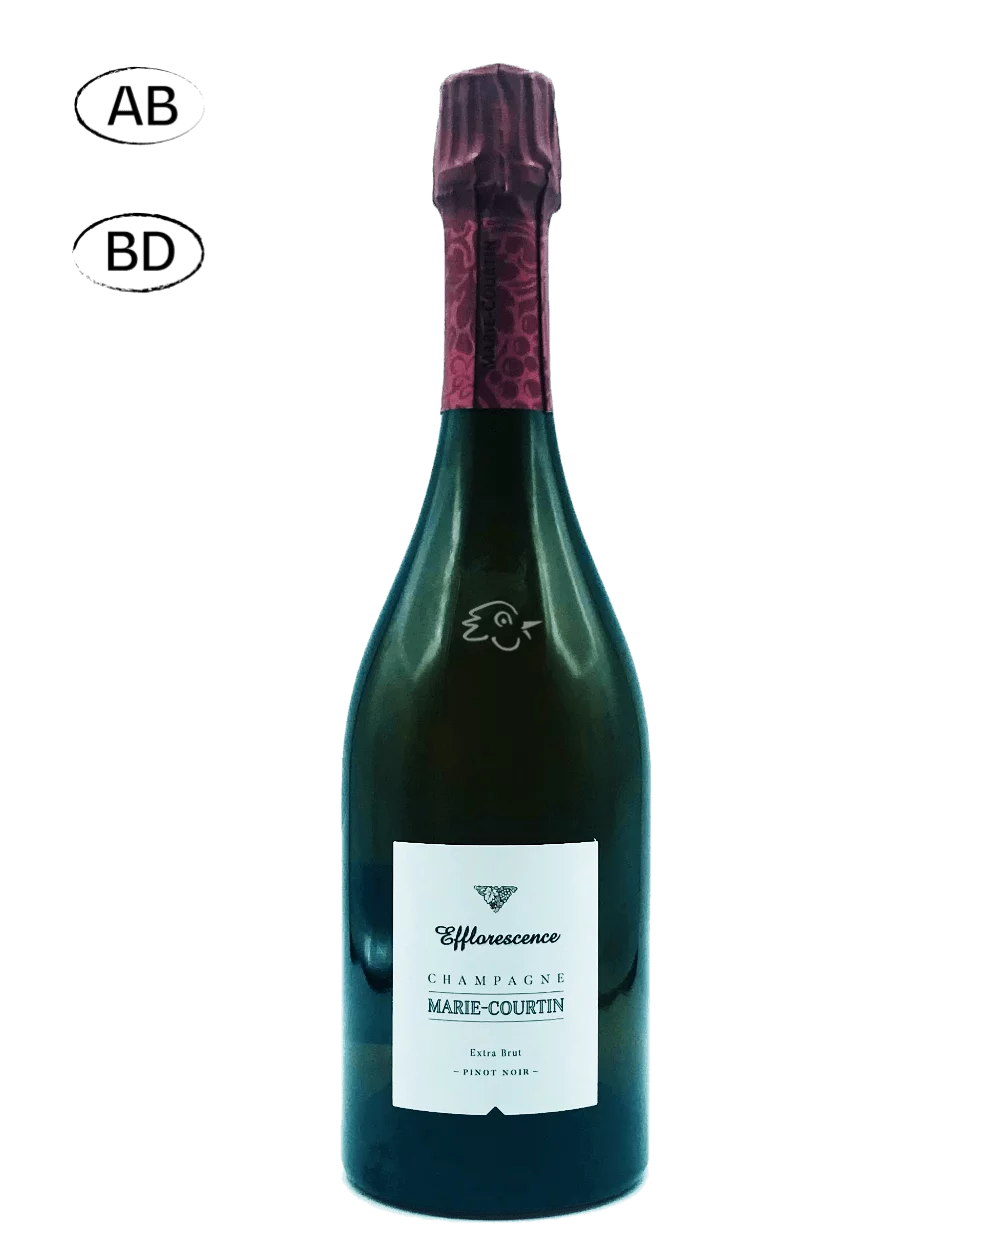 Champagne Marie Courtin - Efflorescence 2015 - Avintures